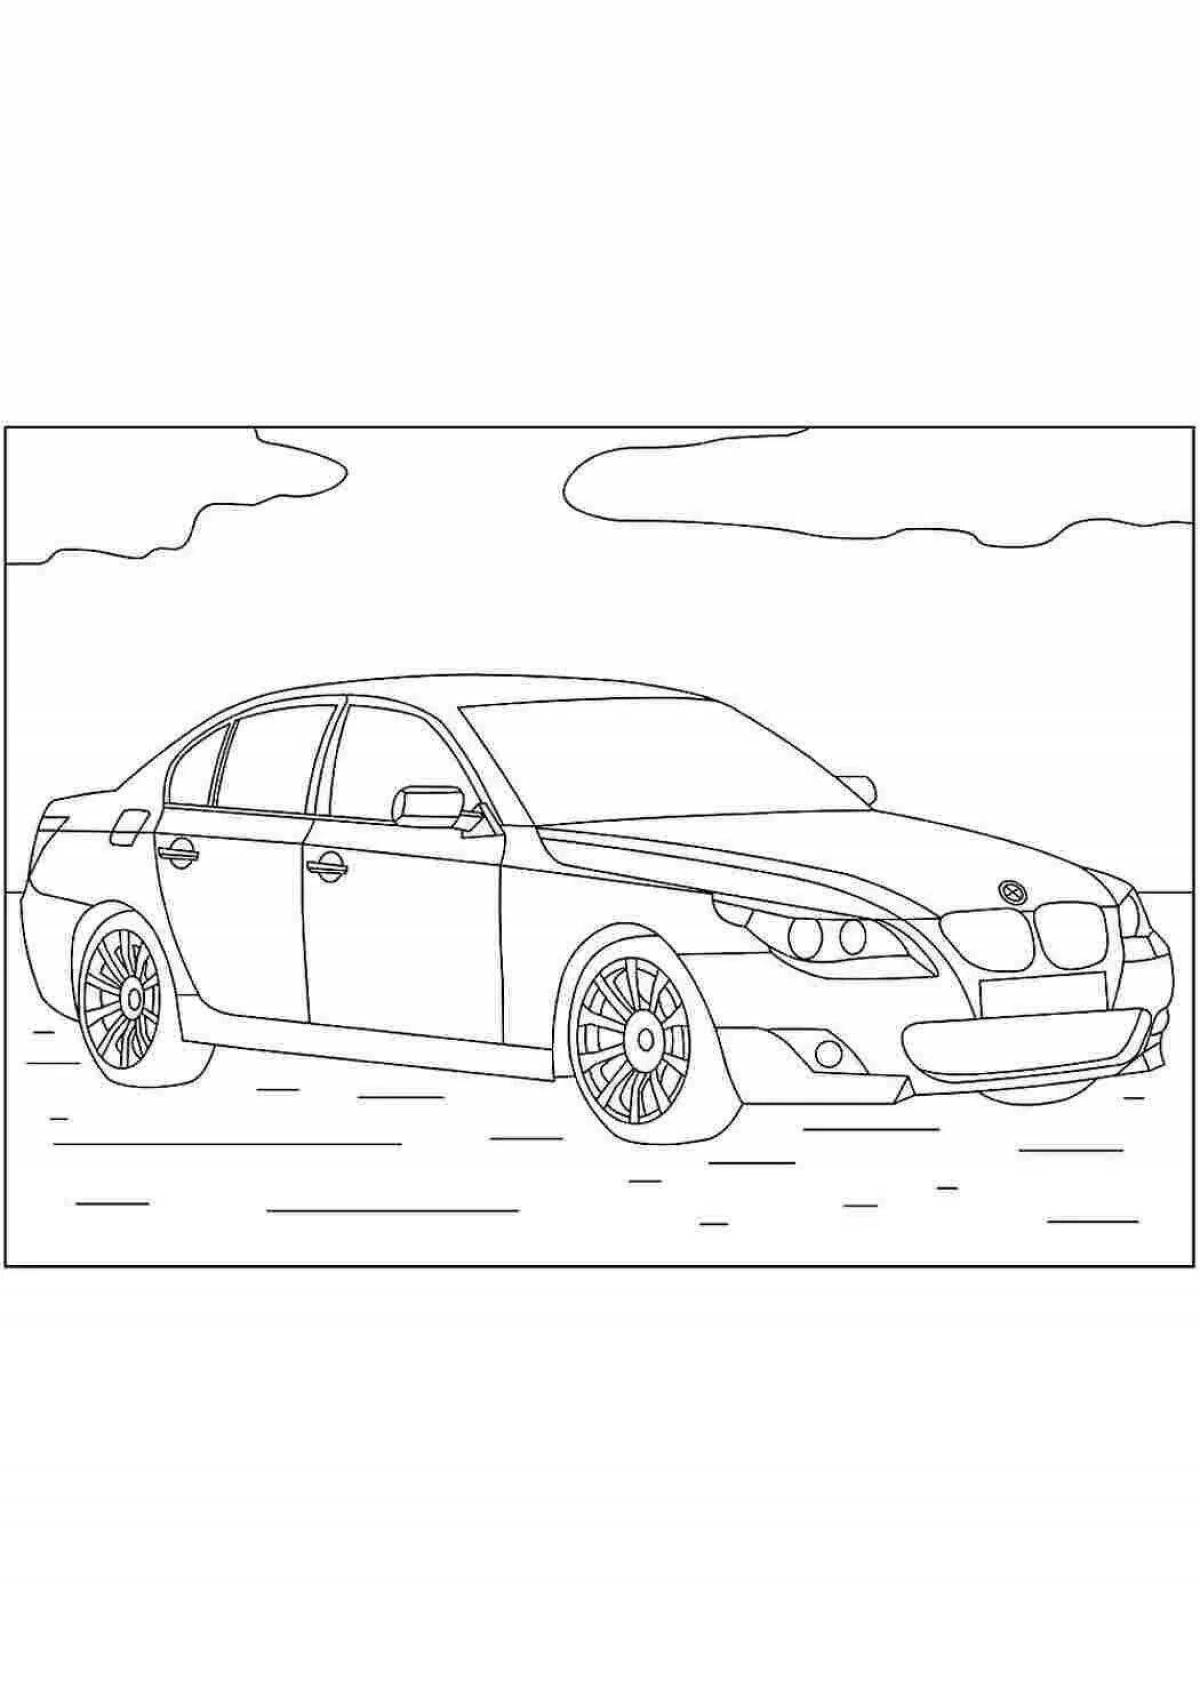 Luxury bmw 5 series coloring book